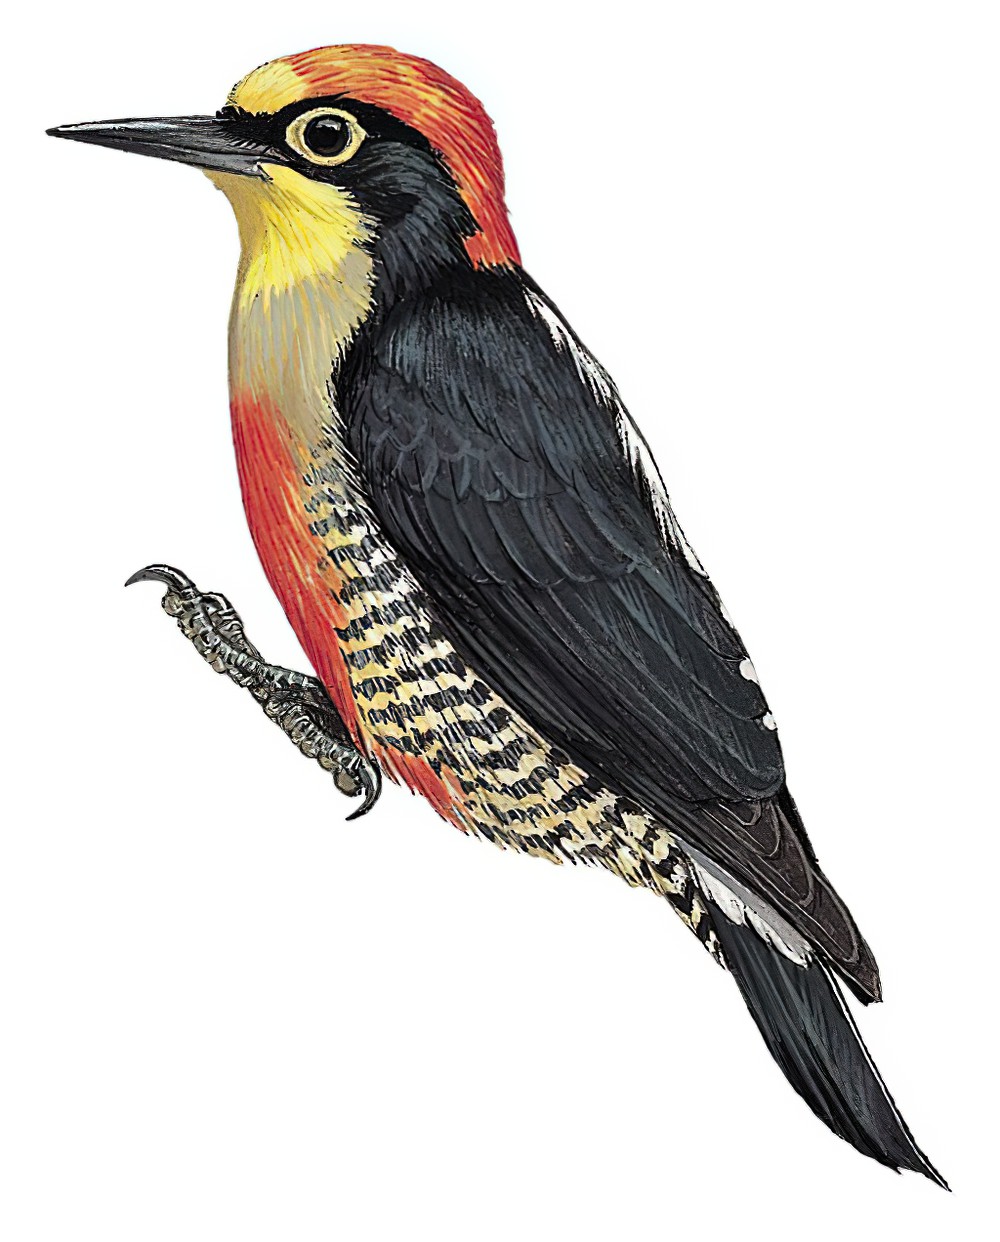 Yellow-fronted Woodpecker / Melanerpes flavifrons